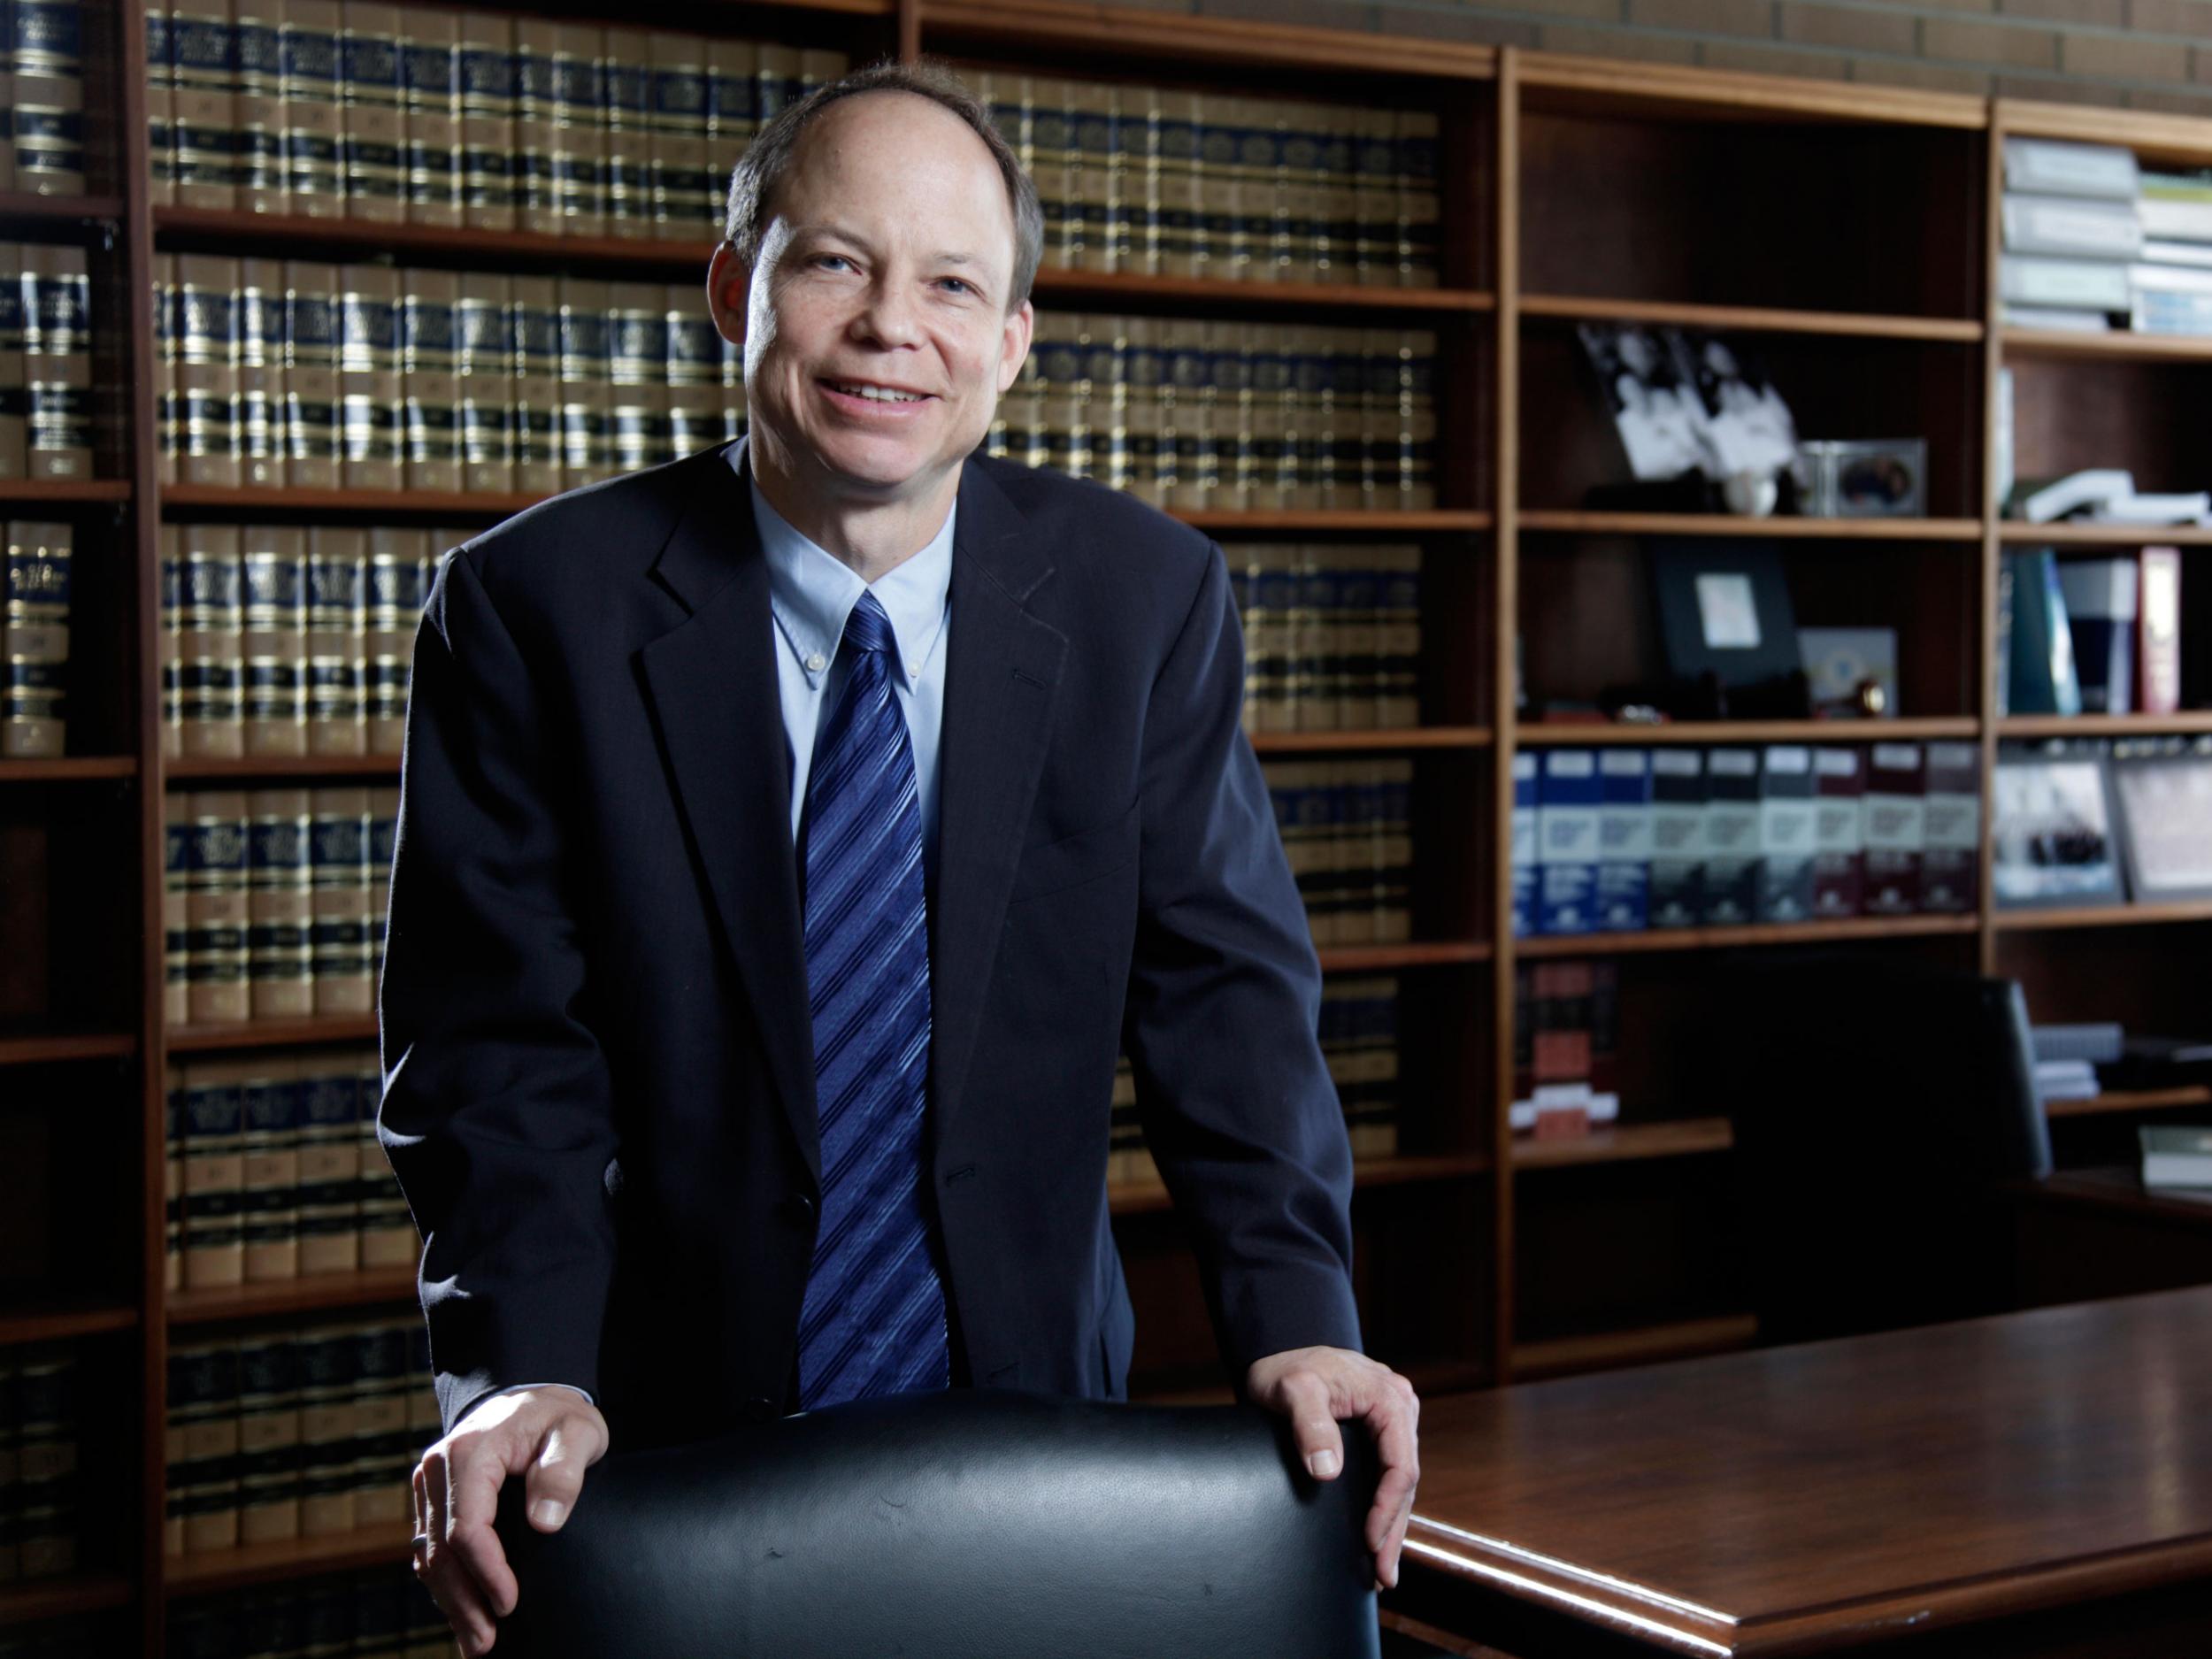 Judge Persky has been recalled after the people of Santa Clara County voted in favour